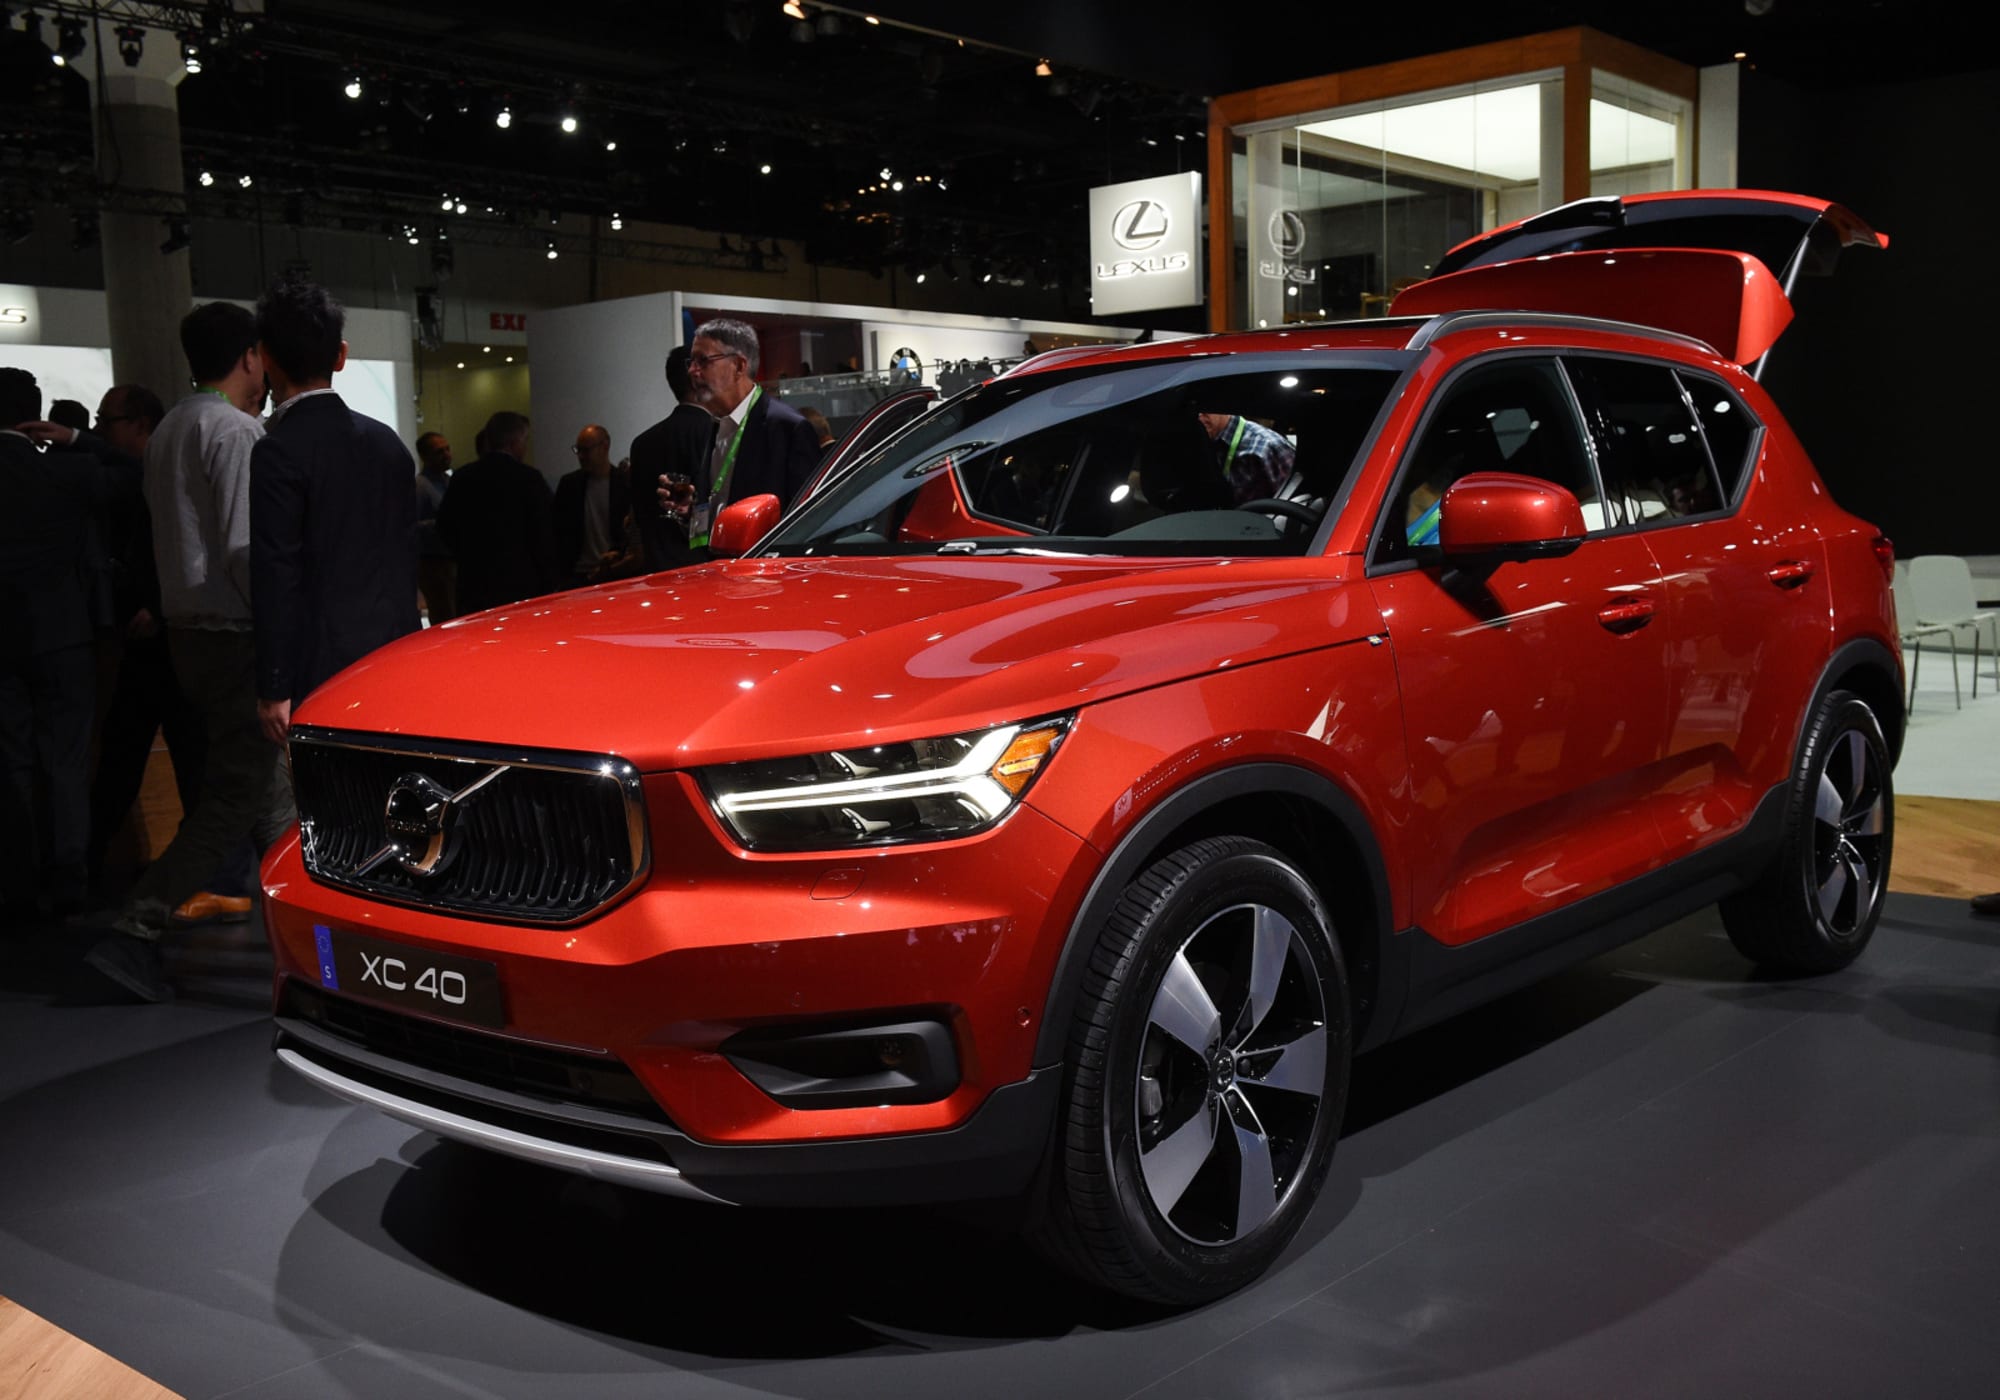 Volvo XC40 Is Unveiled as the Brand's First Electric Car